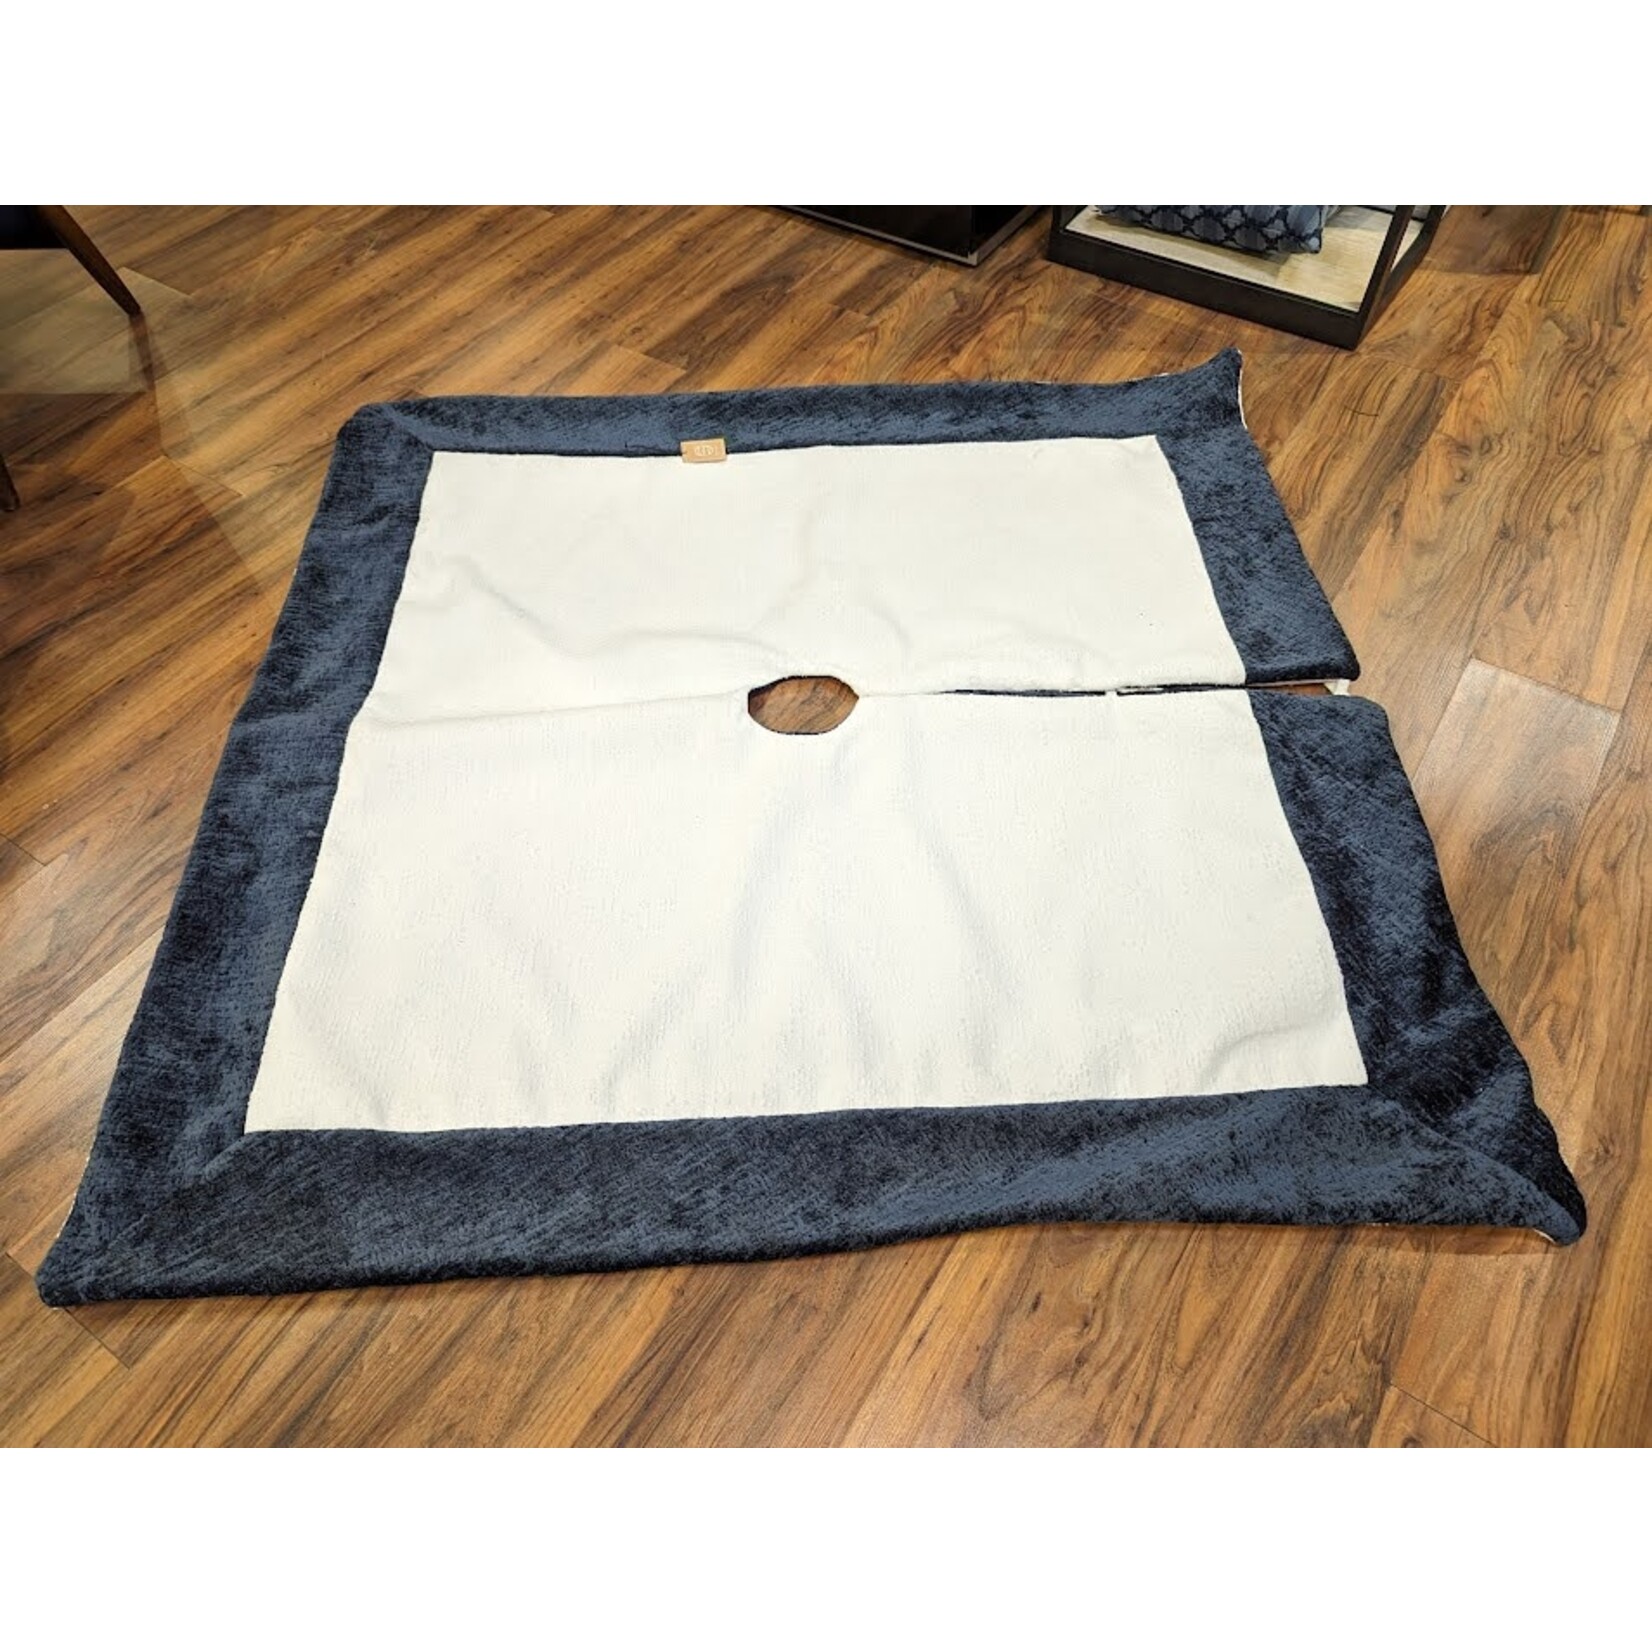 Nicky's Notions Blue White Large Square Tree Skirt Reversible